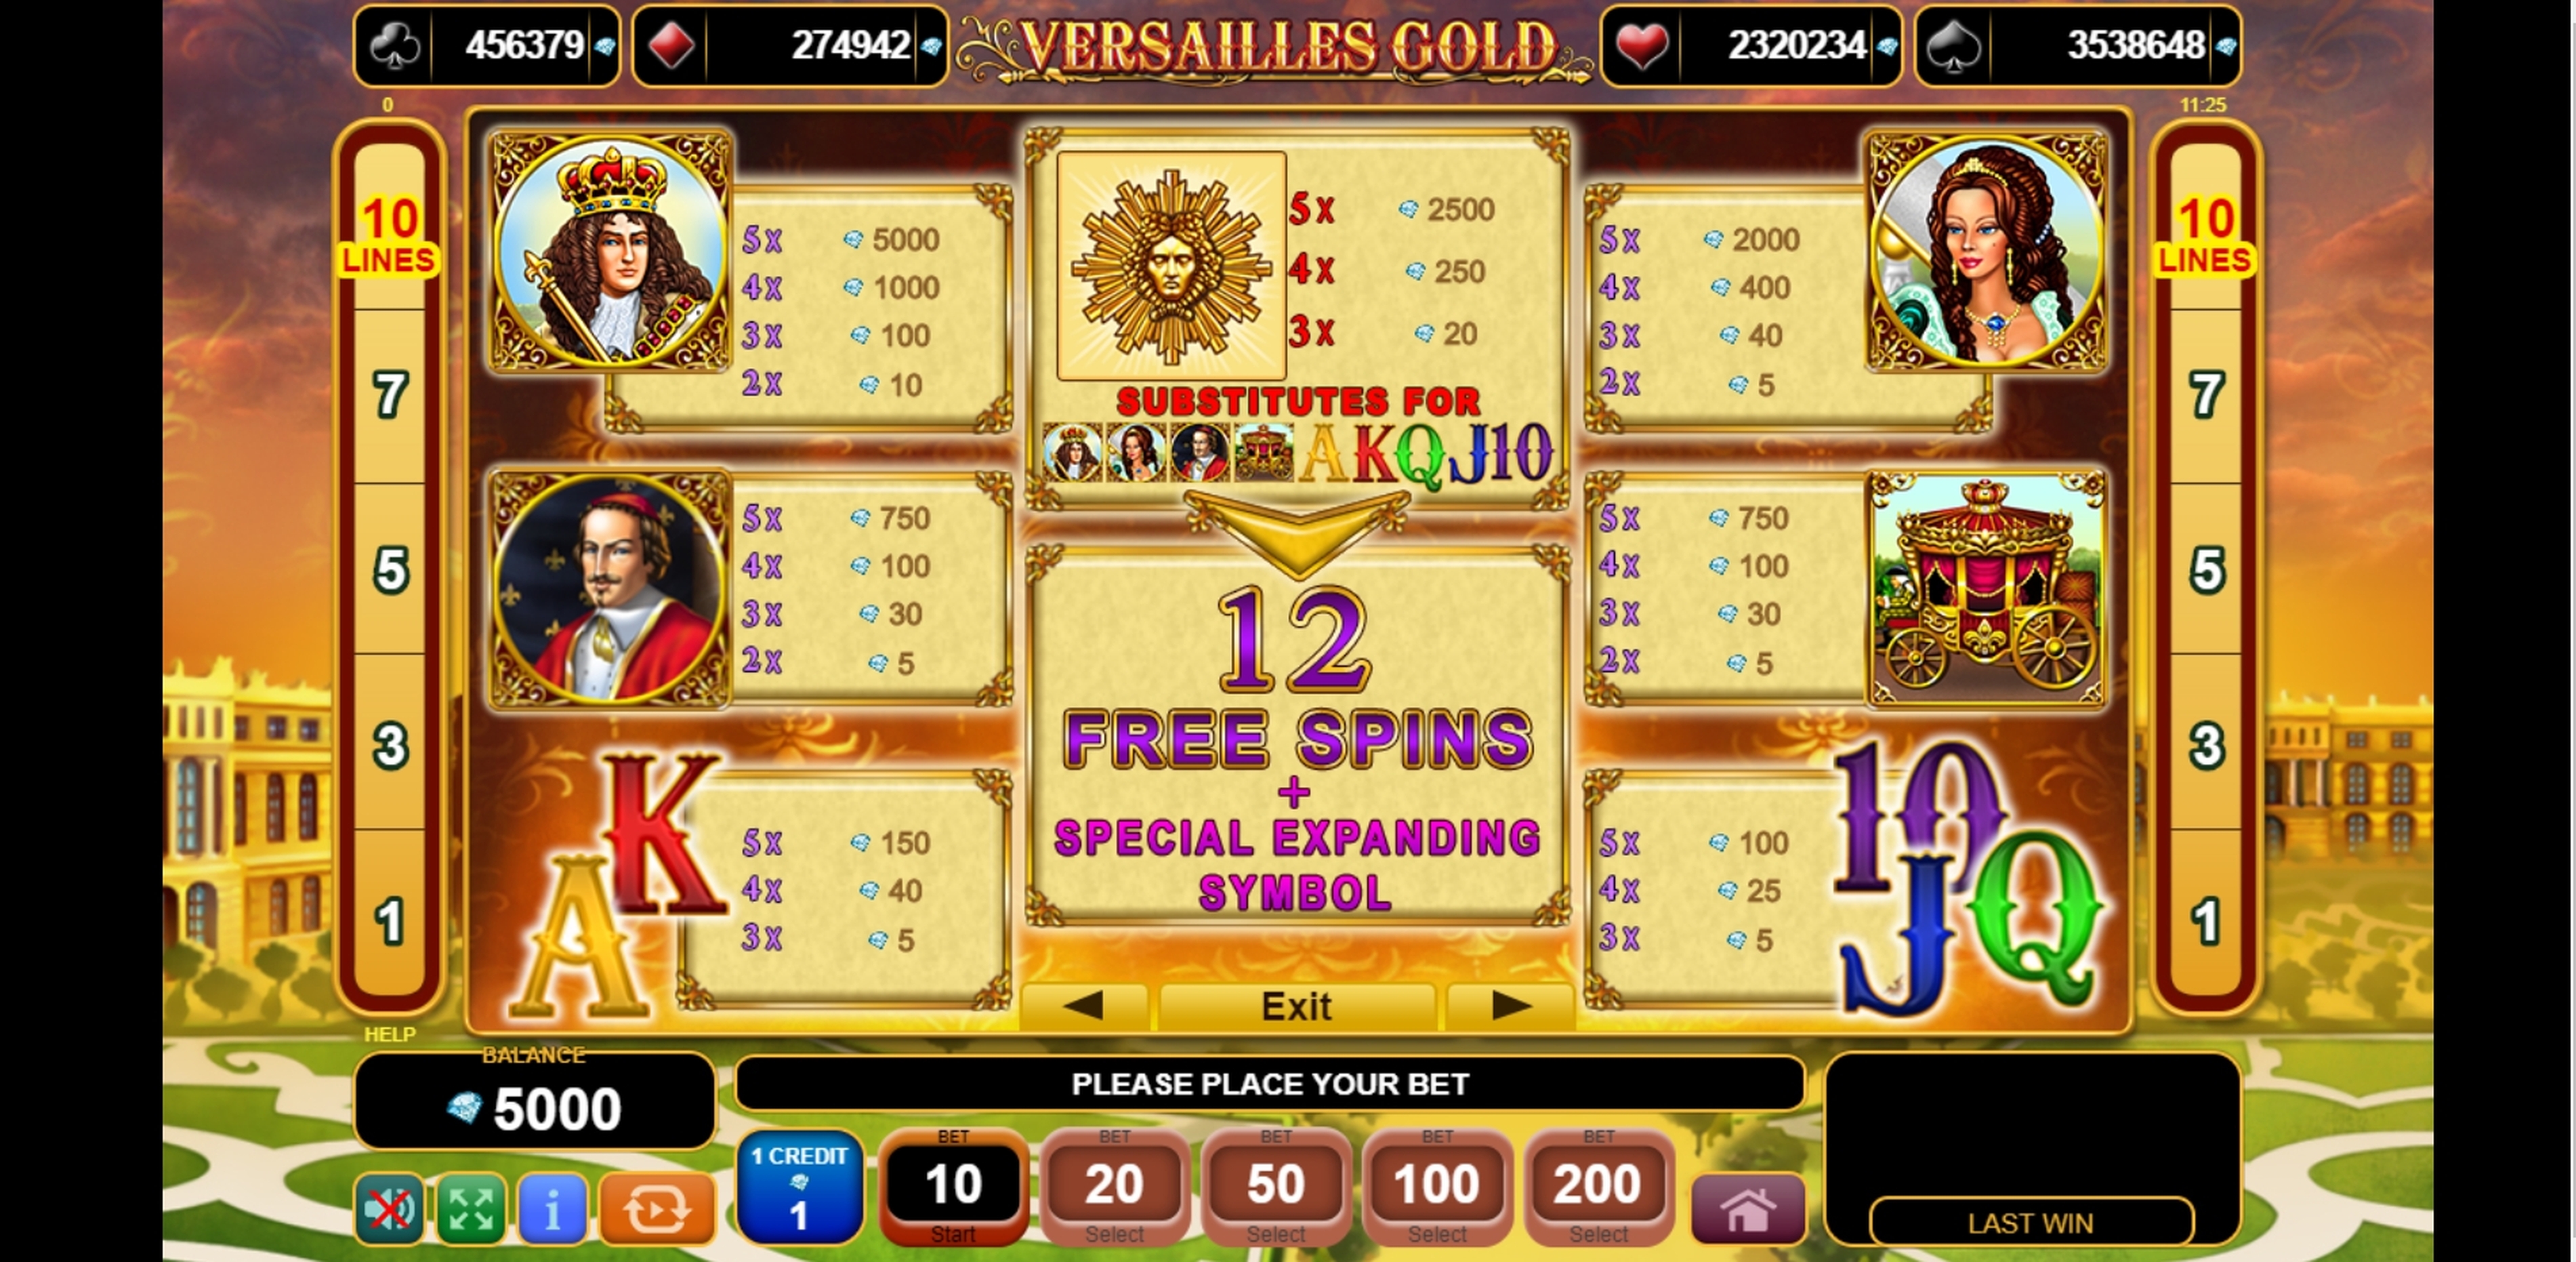 Info of Versailles Gold Slot Game by EGT